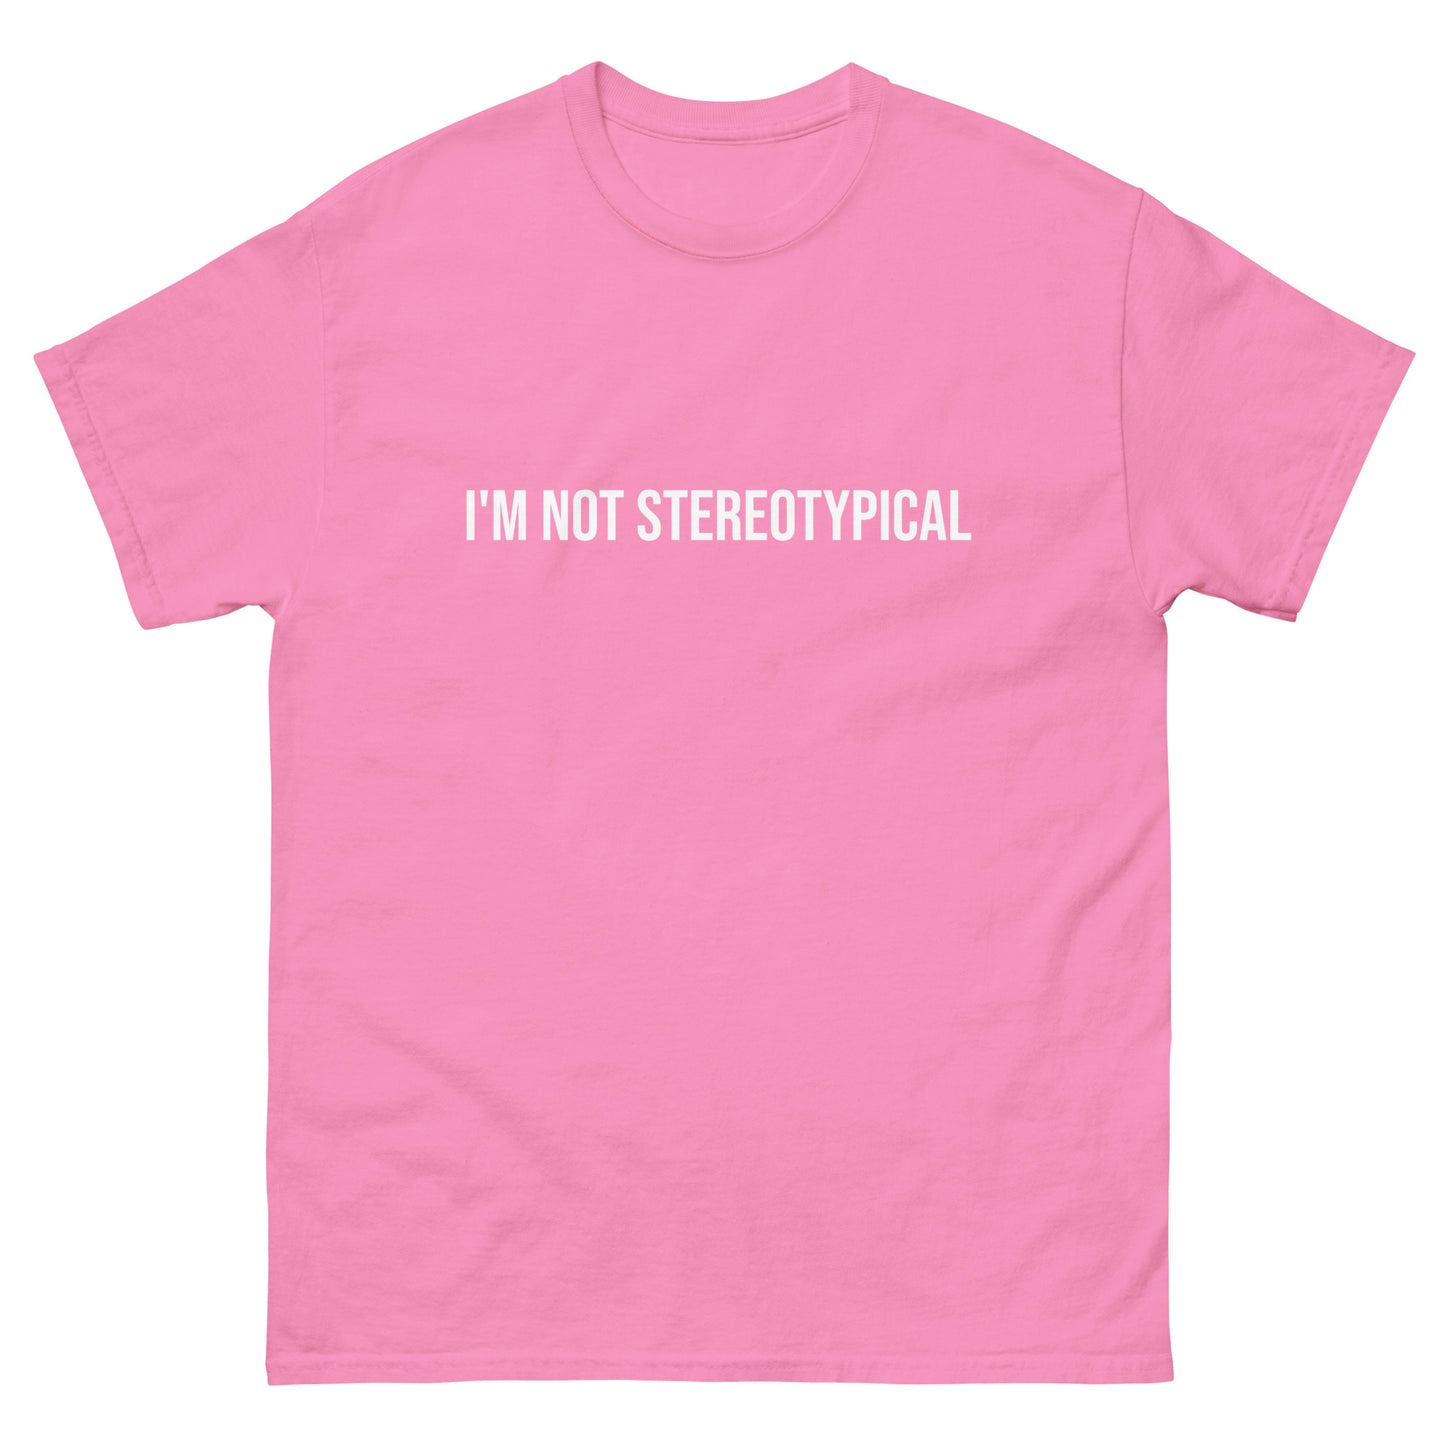 I'm not stereotypical. I'm surroundotypical. Classic tee